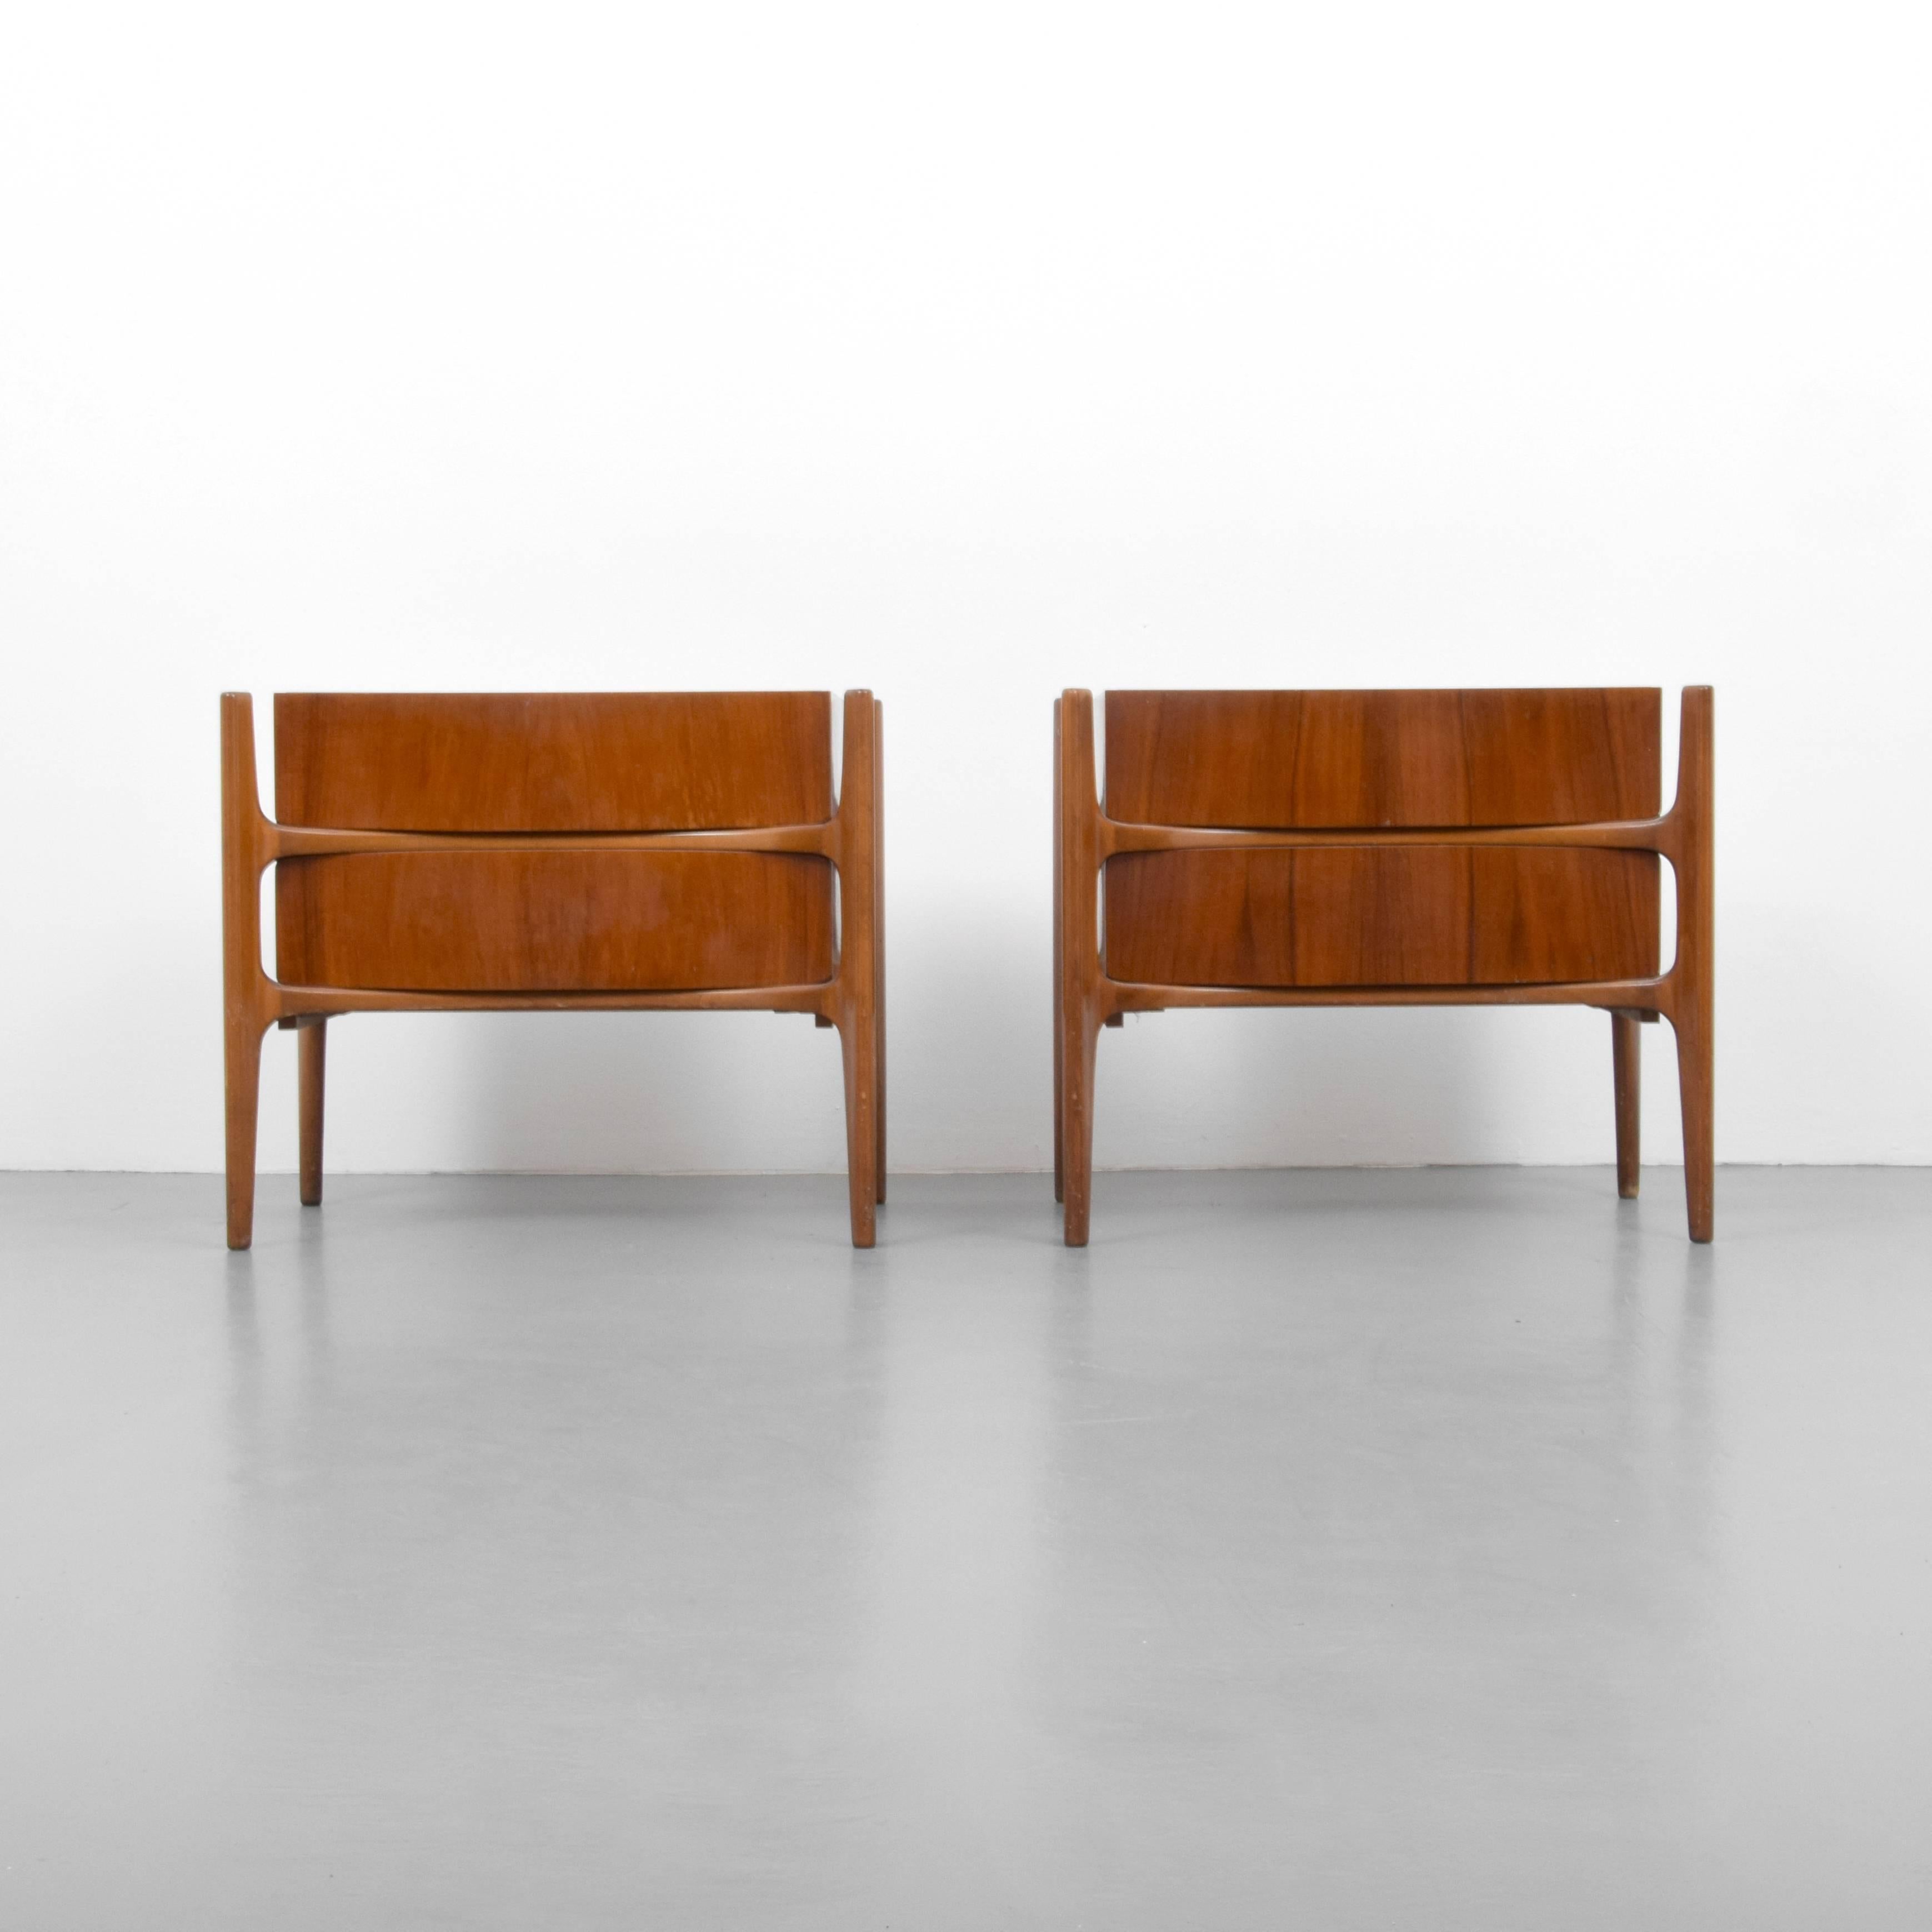 Swedish Pair of William Hinn Nightstands For Sale